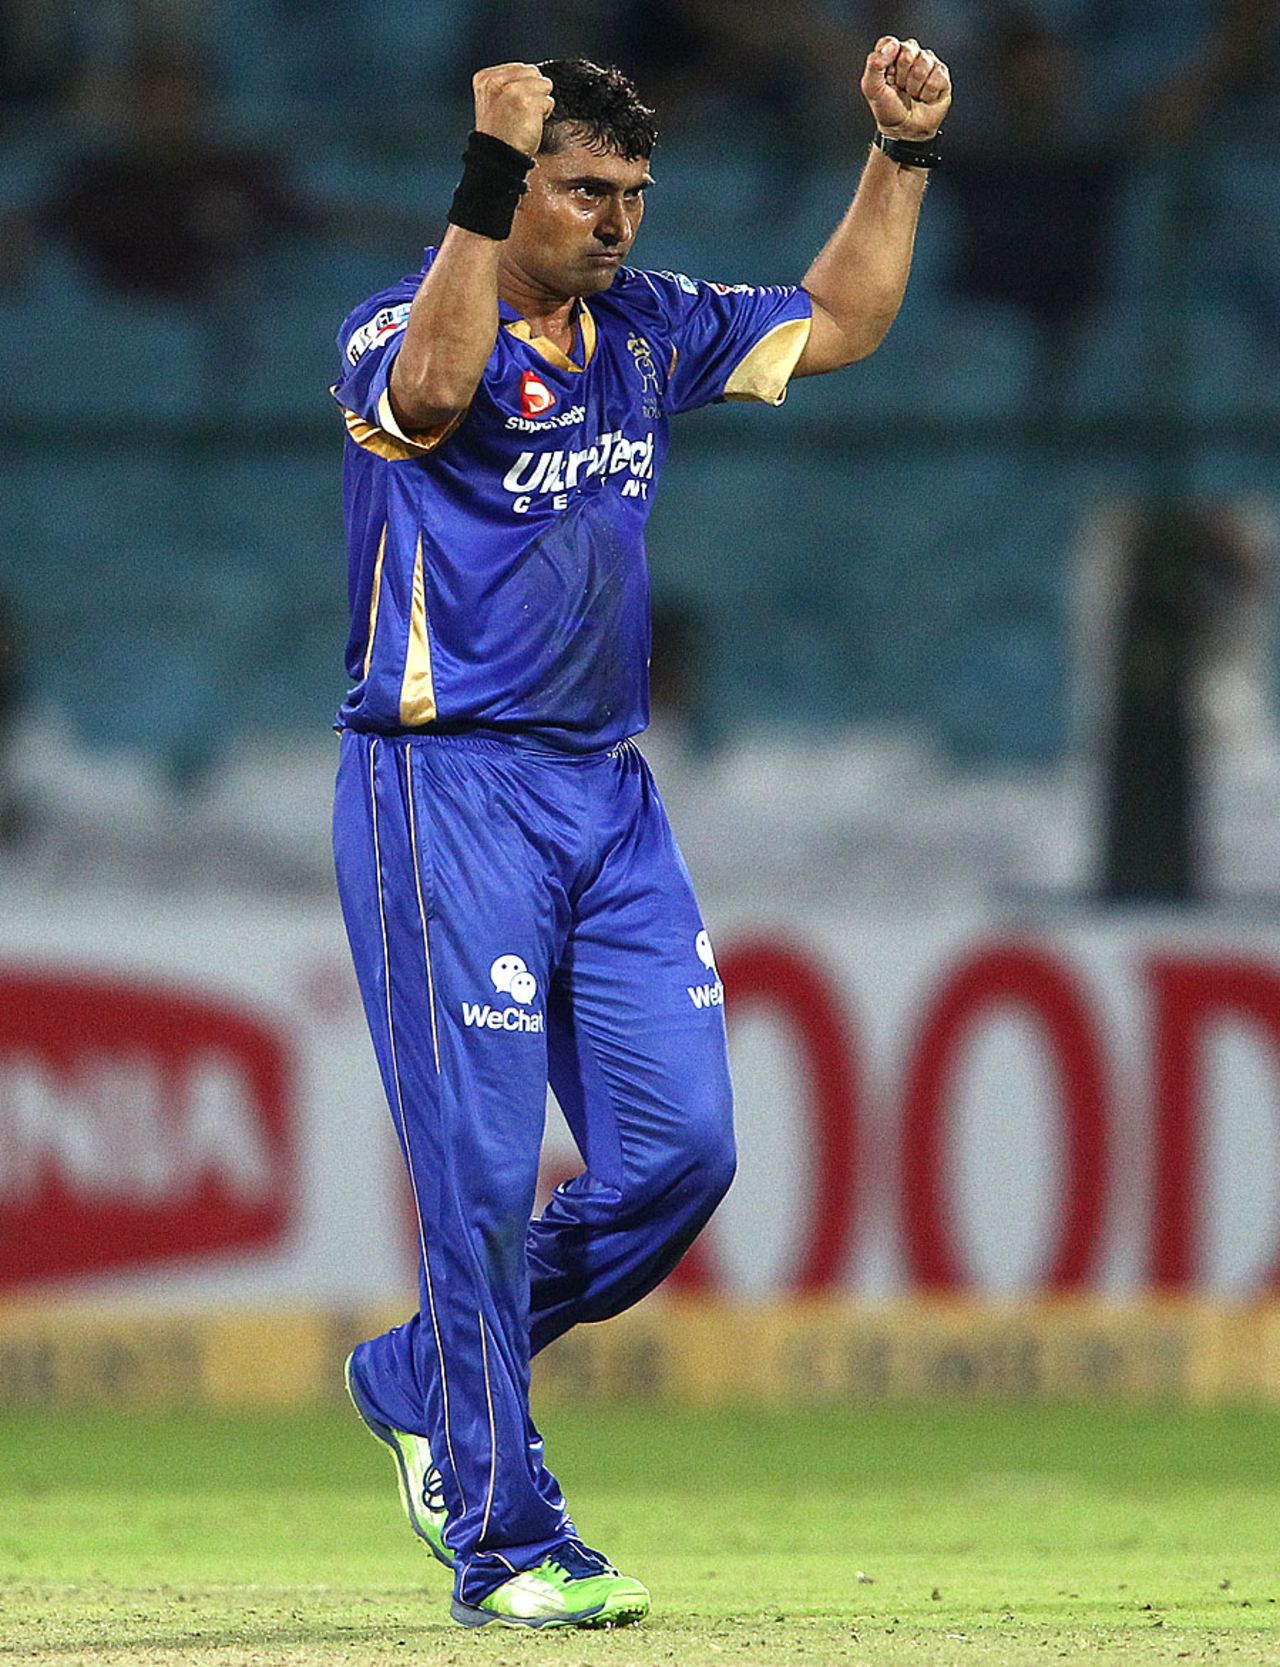 Pravin Tambe finished with 4 for 15, Lions v Rajasthan Royals, Group A, Champions League 2013, Jaipur, September 25, 2013